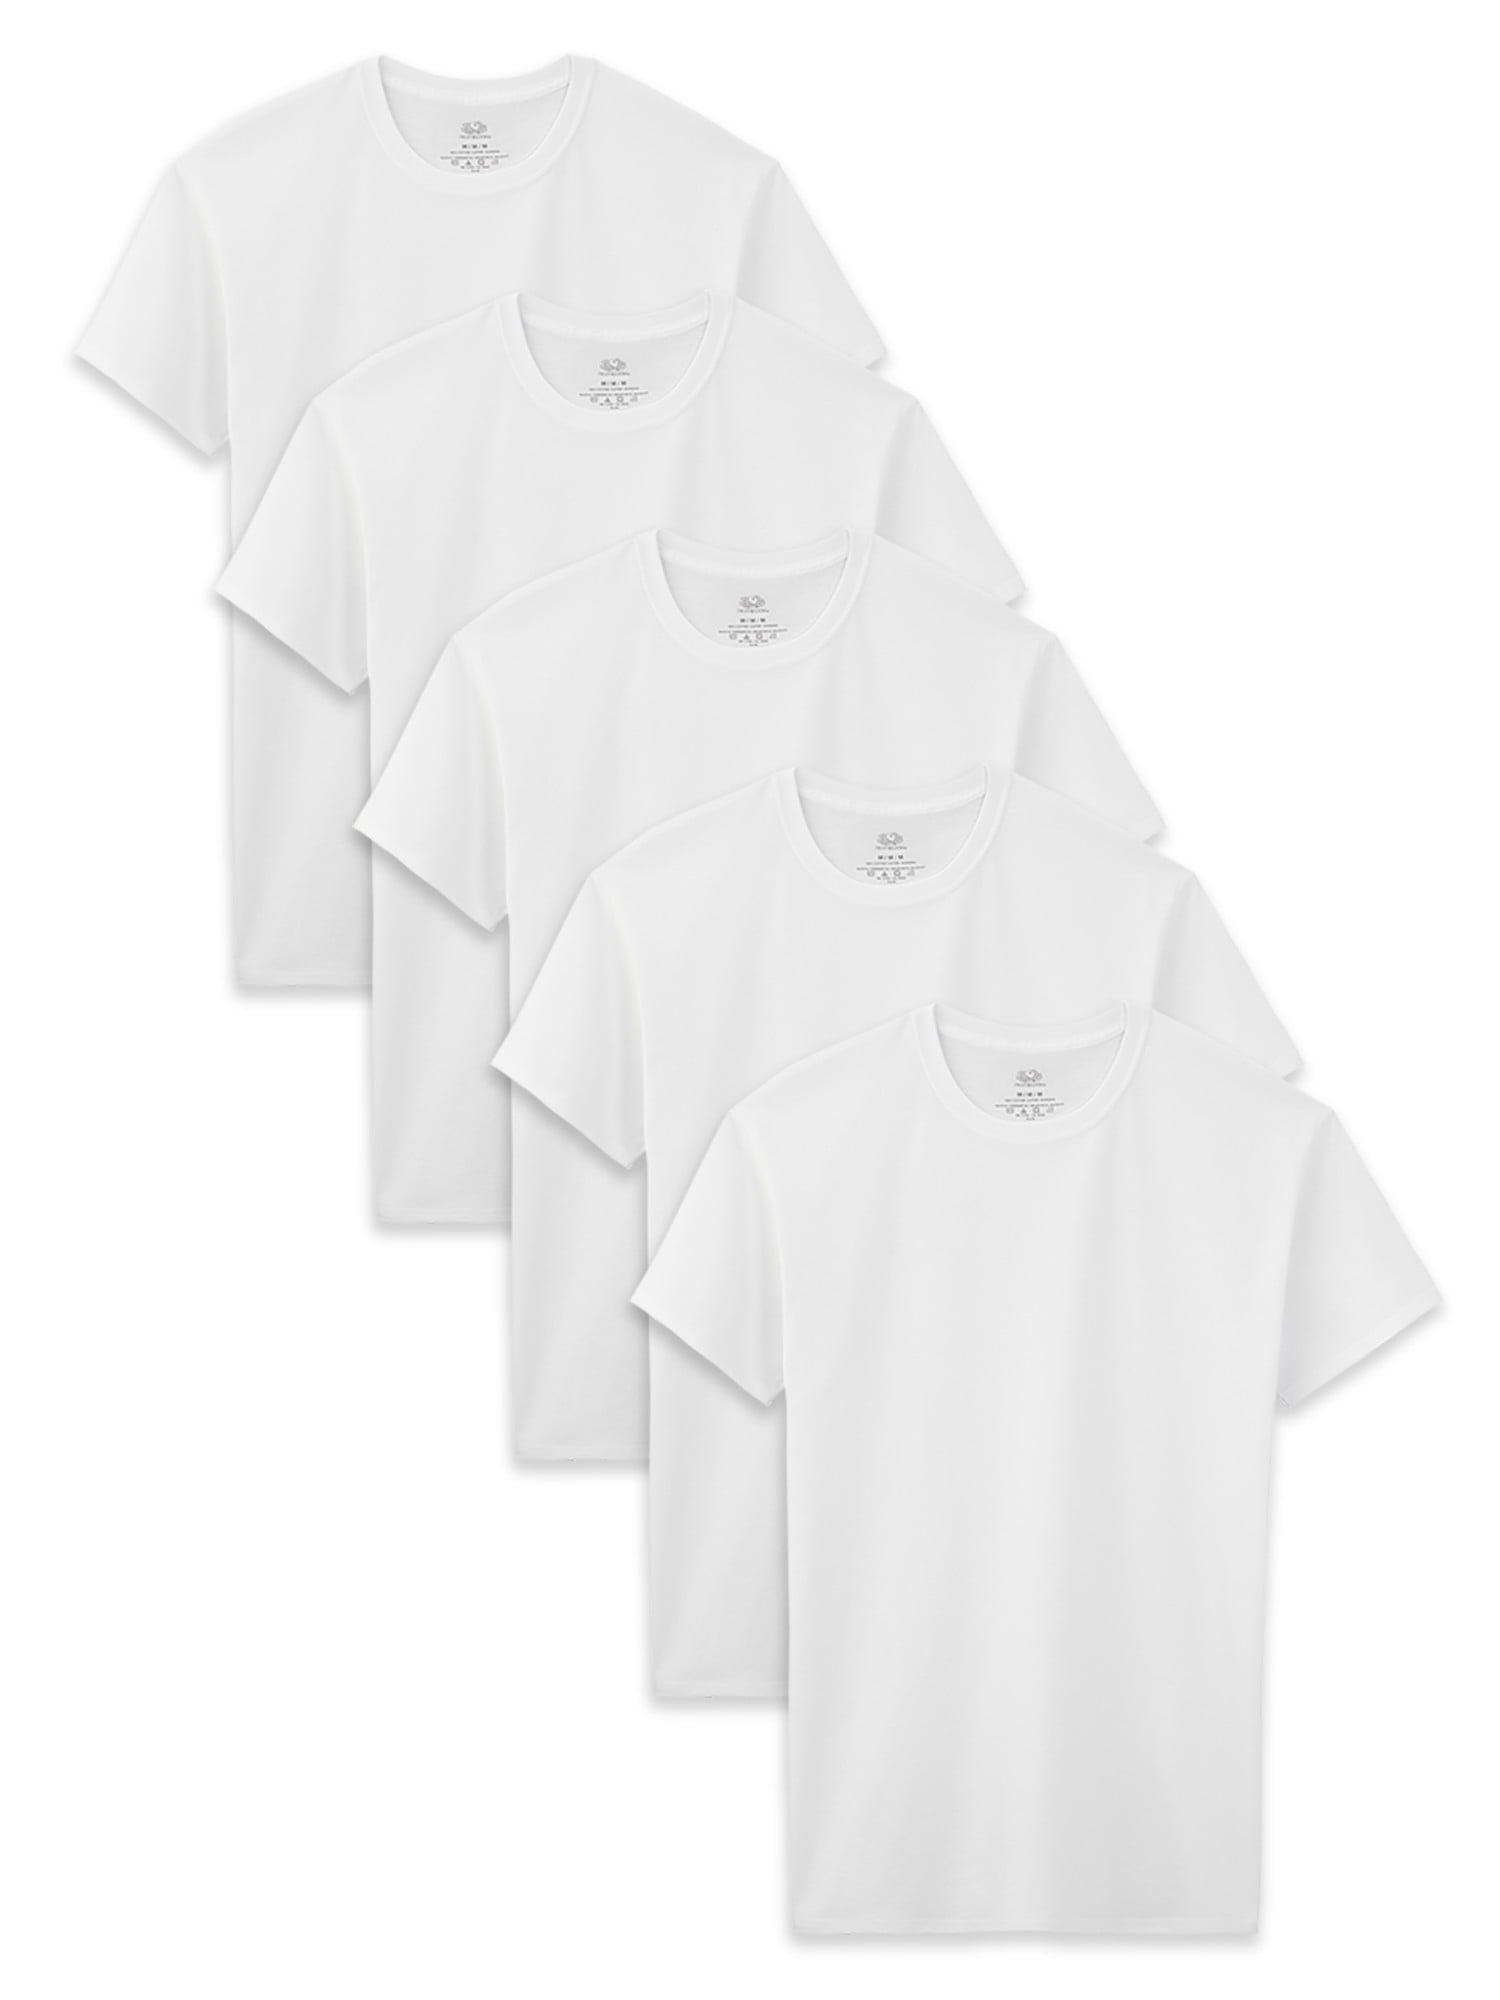 Fruit of the Loom Classic White Crew Undershirts, 5-Pack (Husky ...